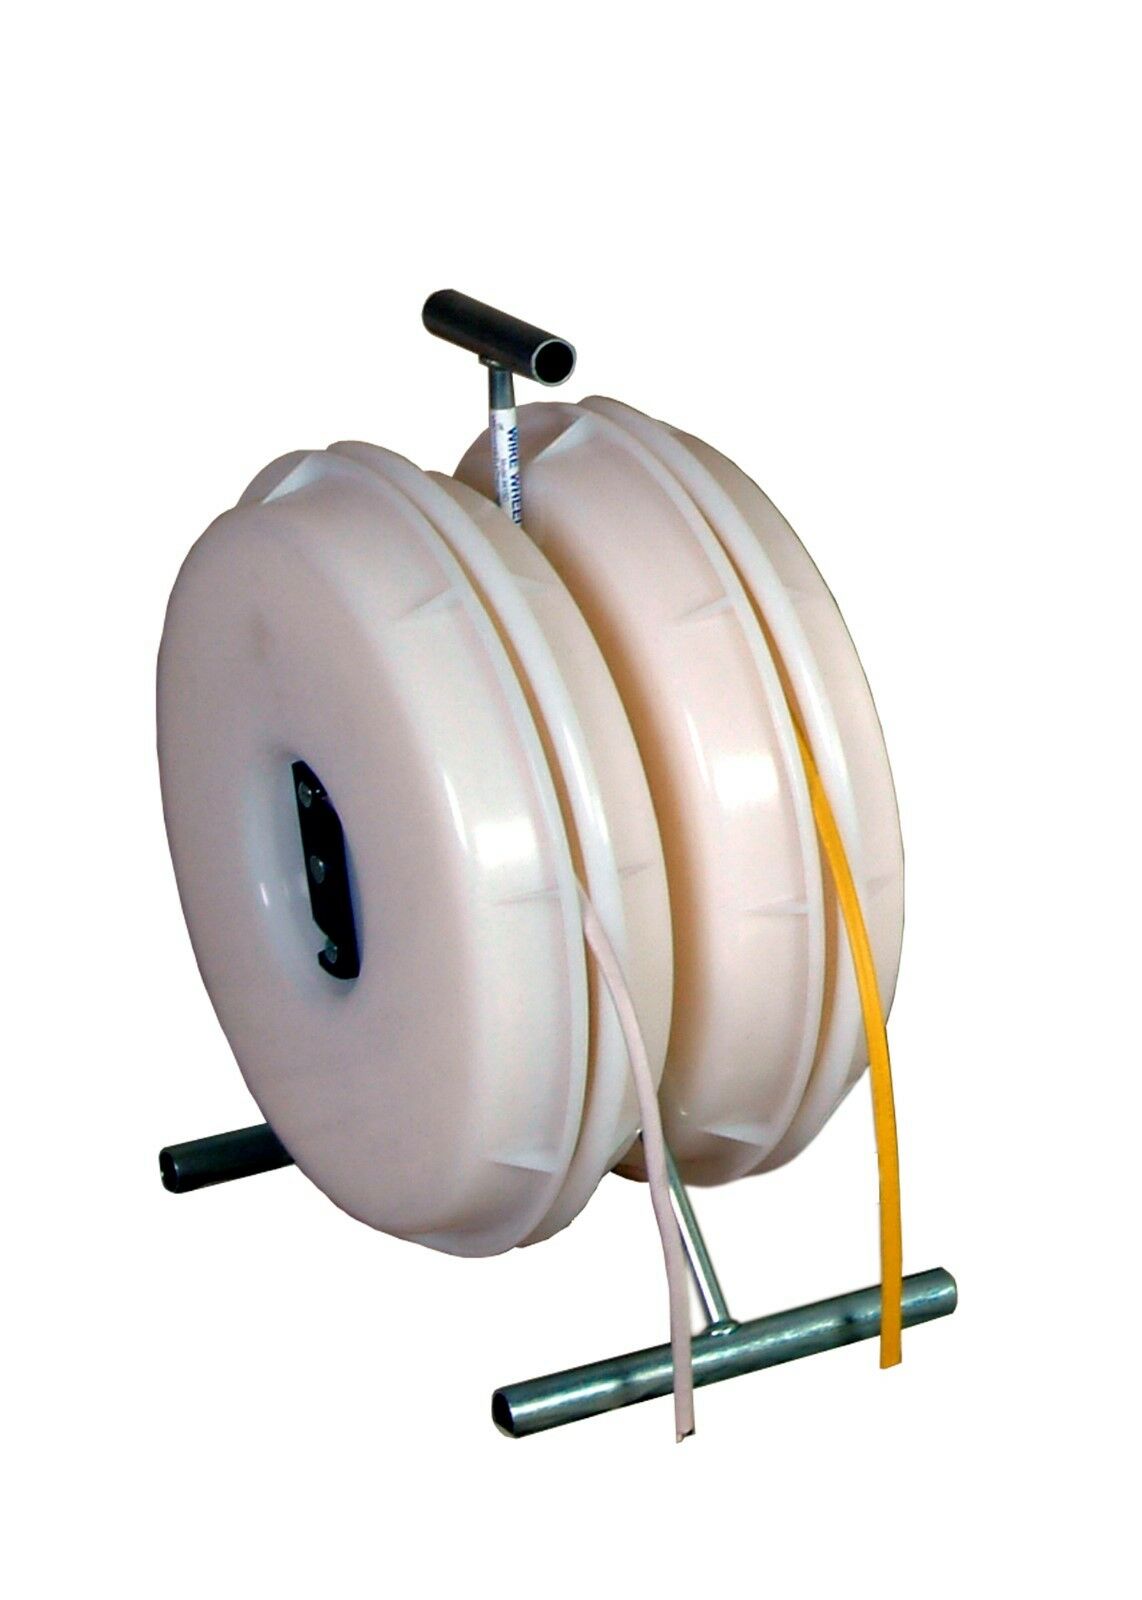 Electrical Wire Spool Dispenser Reel Cable Rack for Pulling Roll  Electrician Job, Wire Spool Rack 